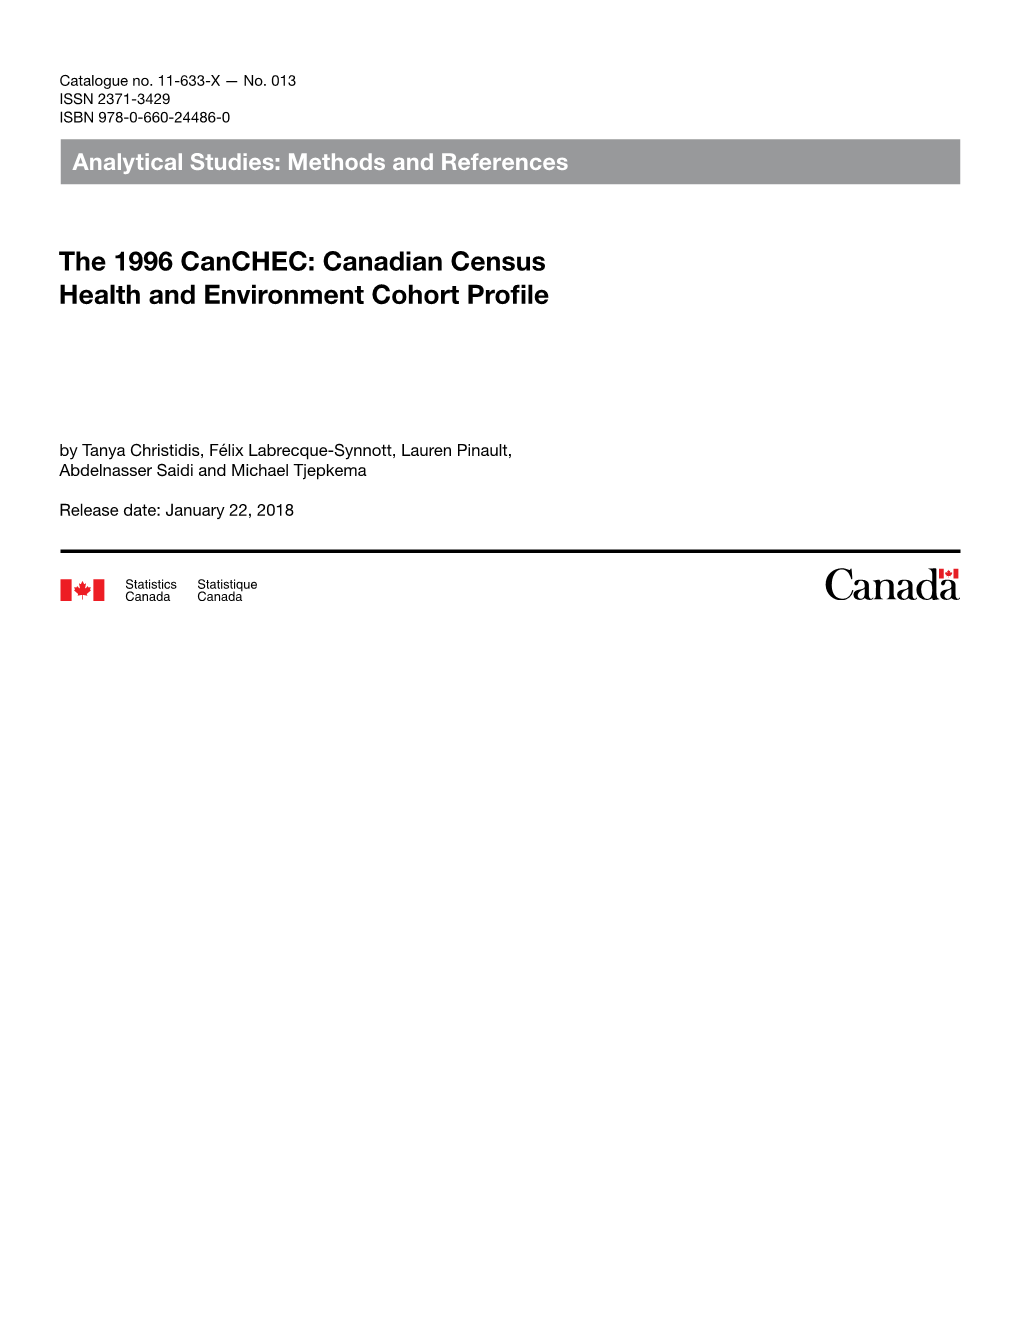 Canadian Census Health and Environment Cohort Profile